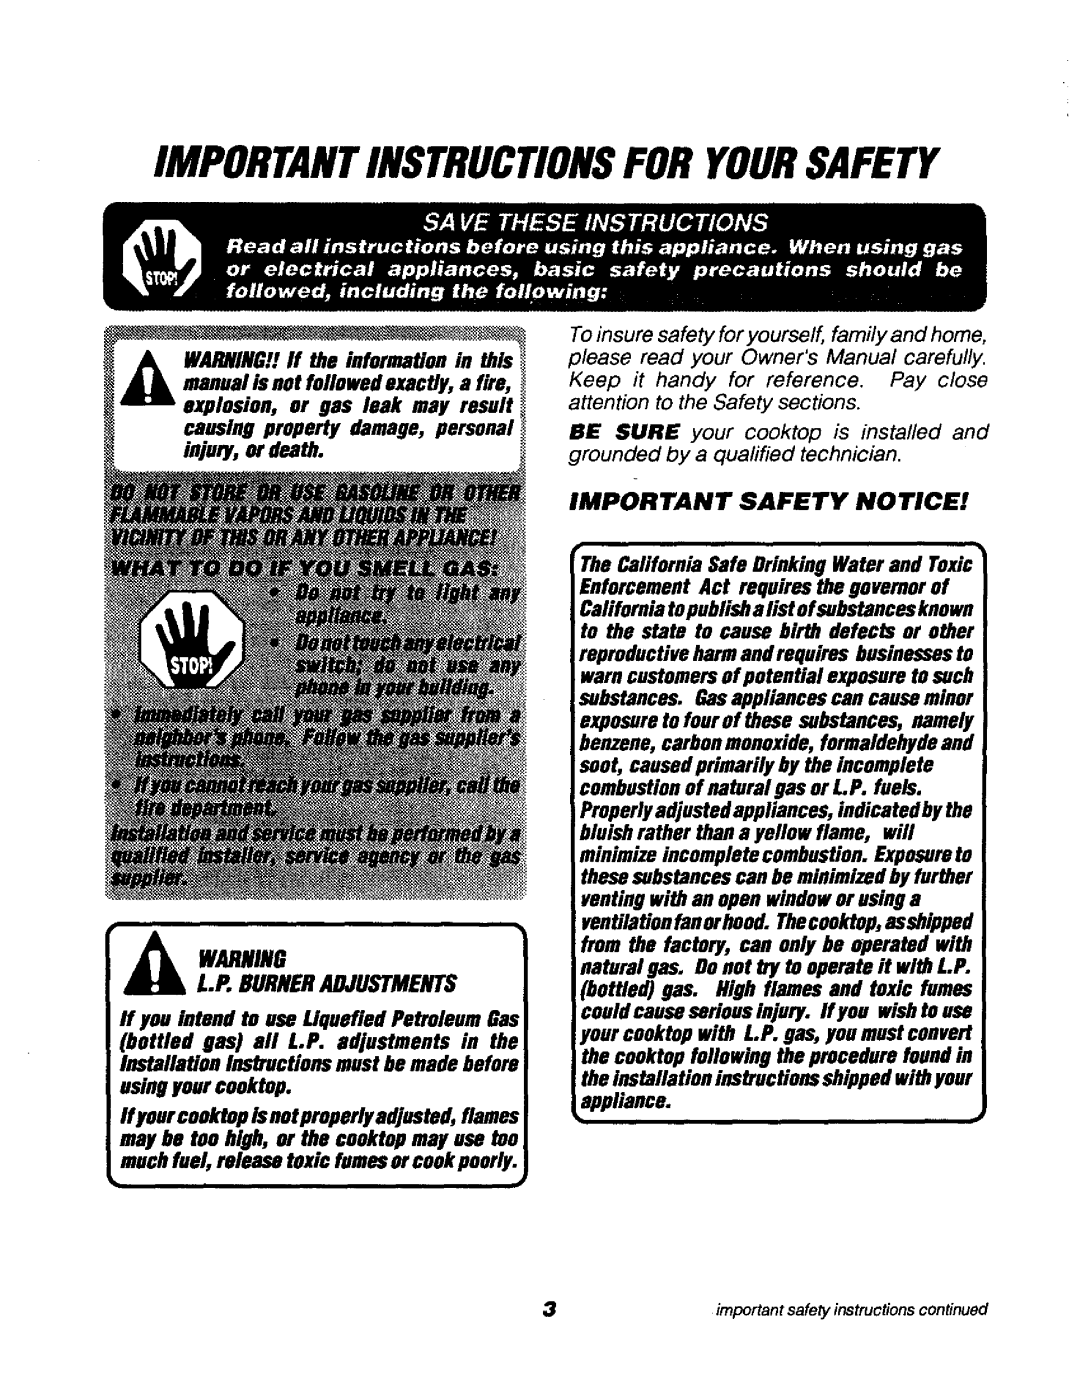 Sears 911.3235S, 911.32359 Importantinstructionsfor Yoursafety, Warning L.P. Burneradjustments, Important Safety Notice 